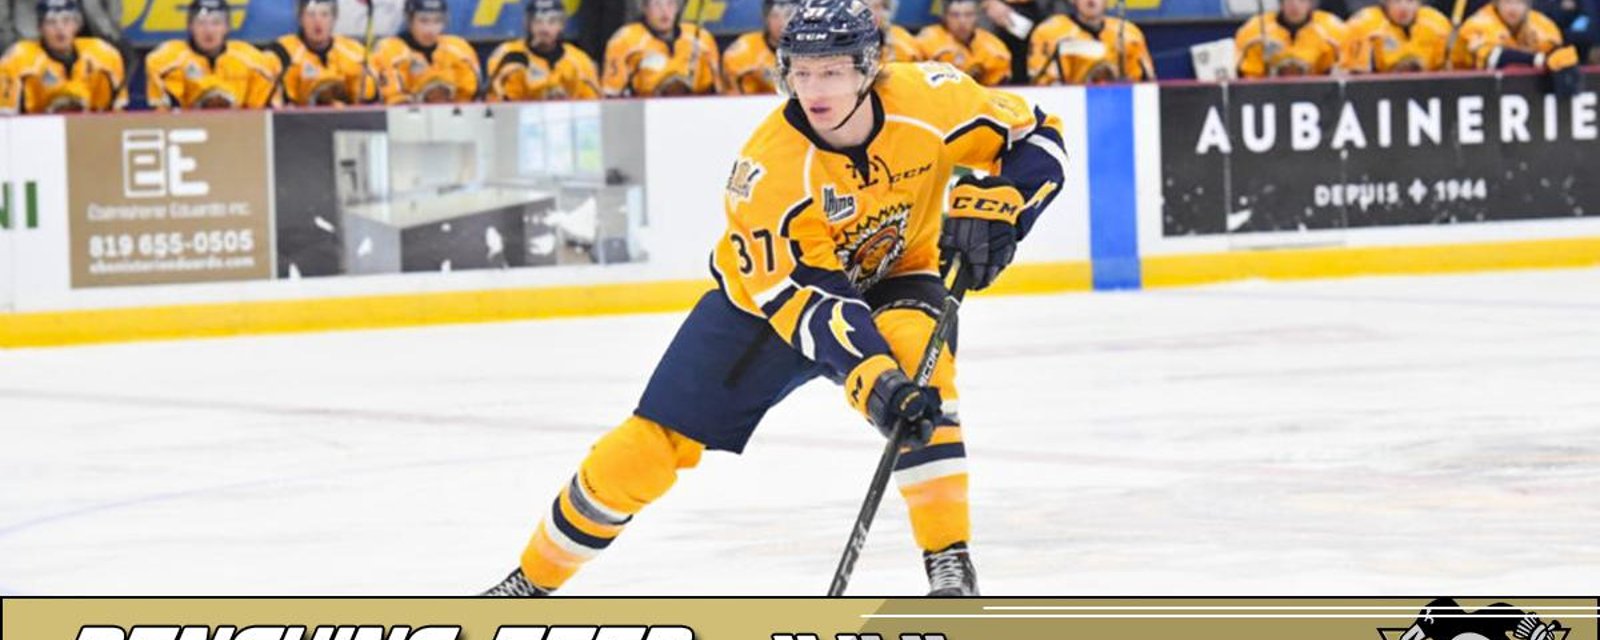 Report: Jan Drozg is doing quite good in the QMJHL!